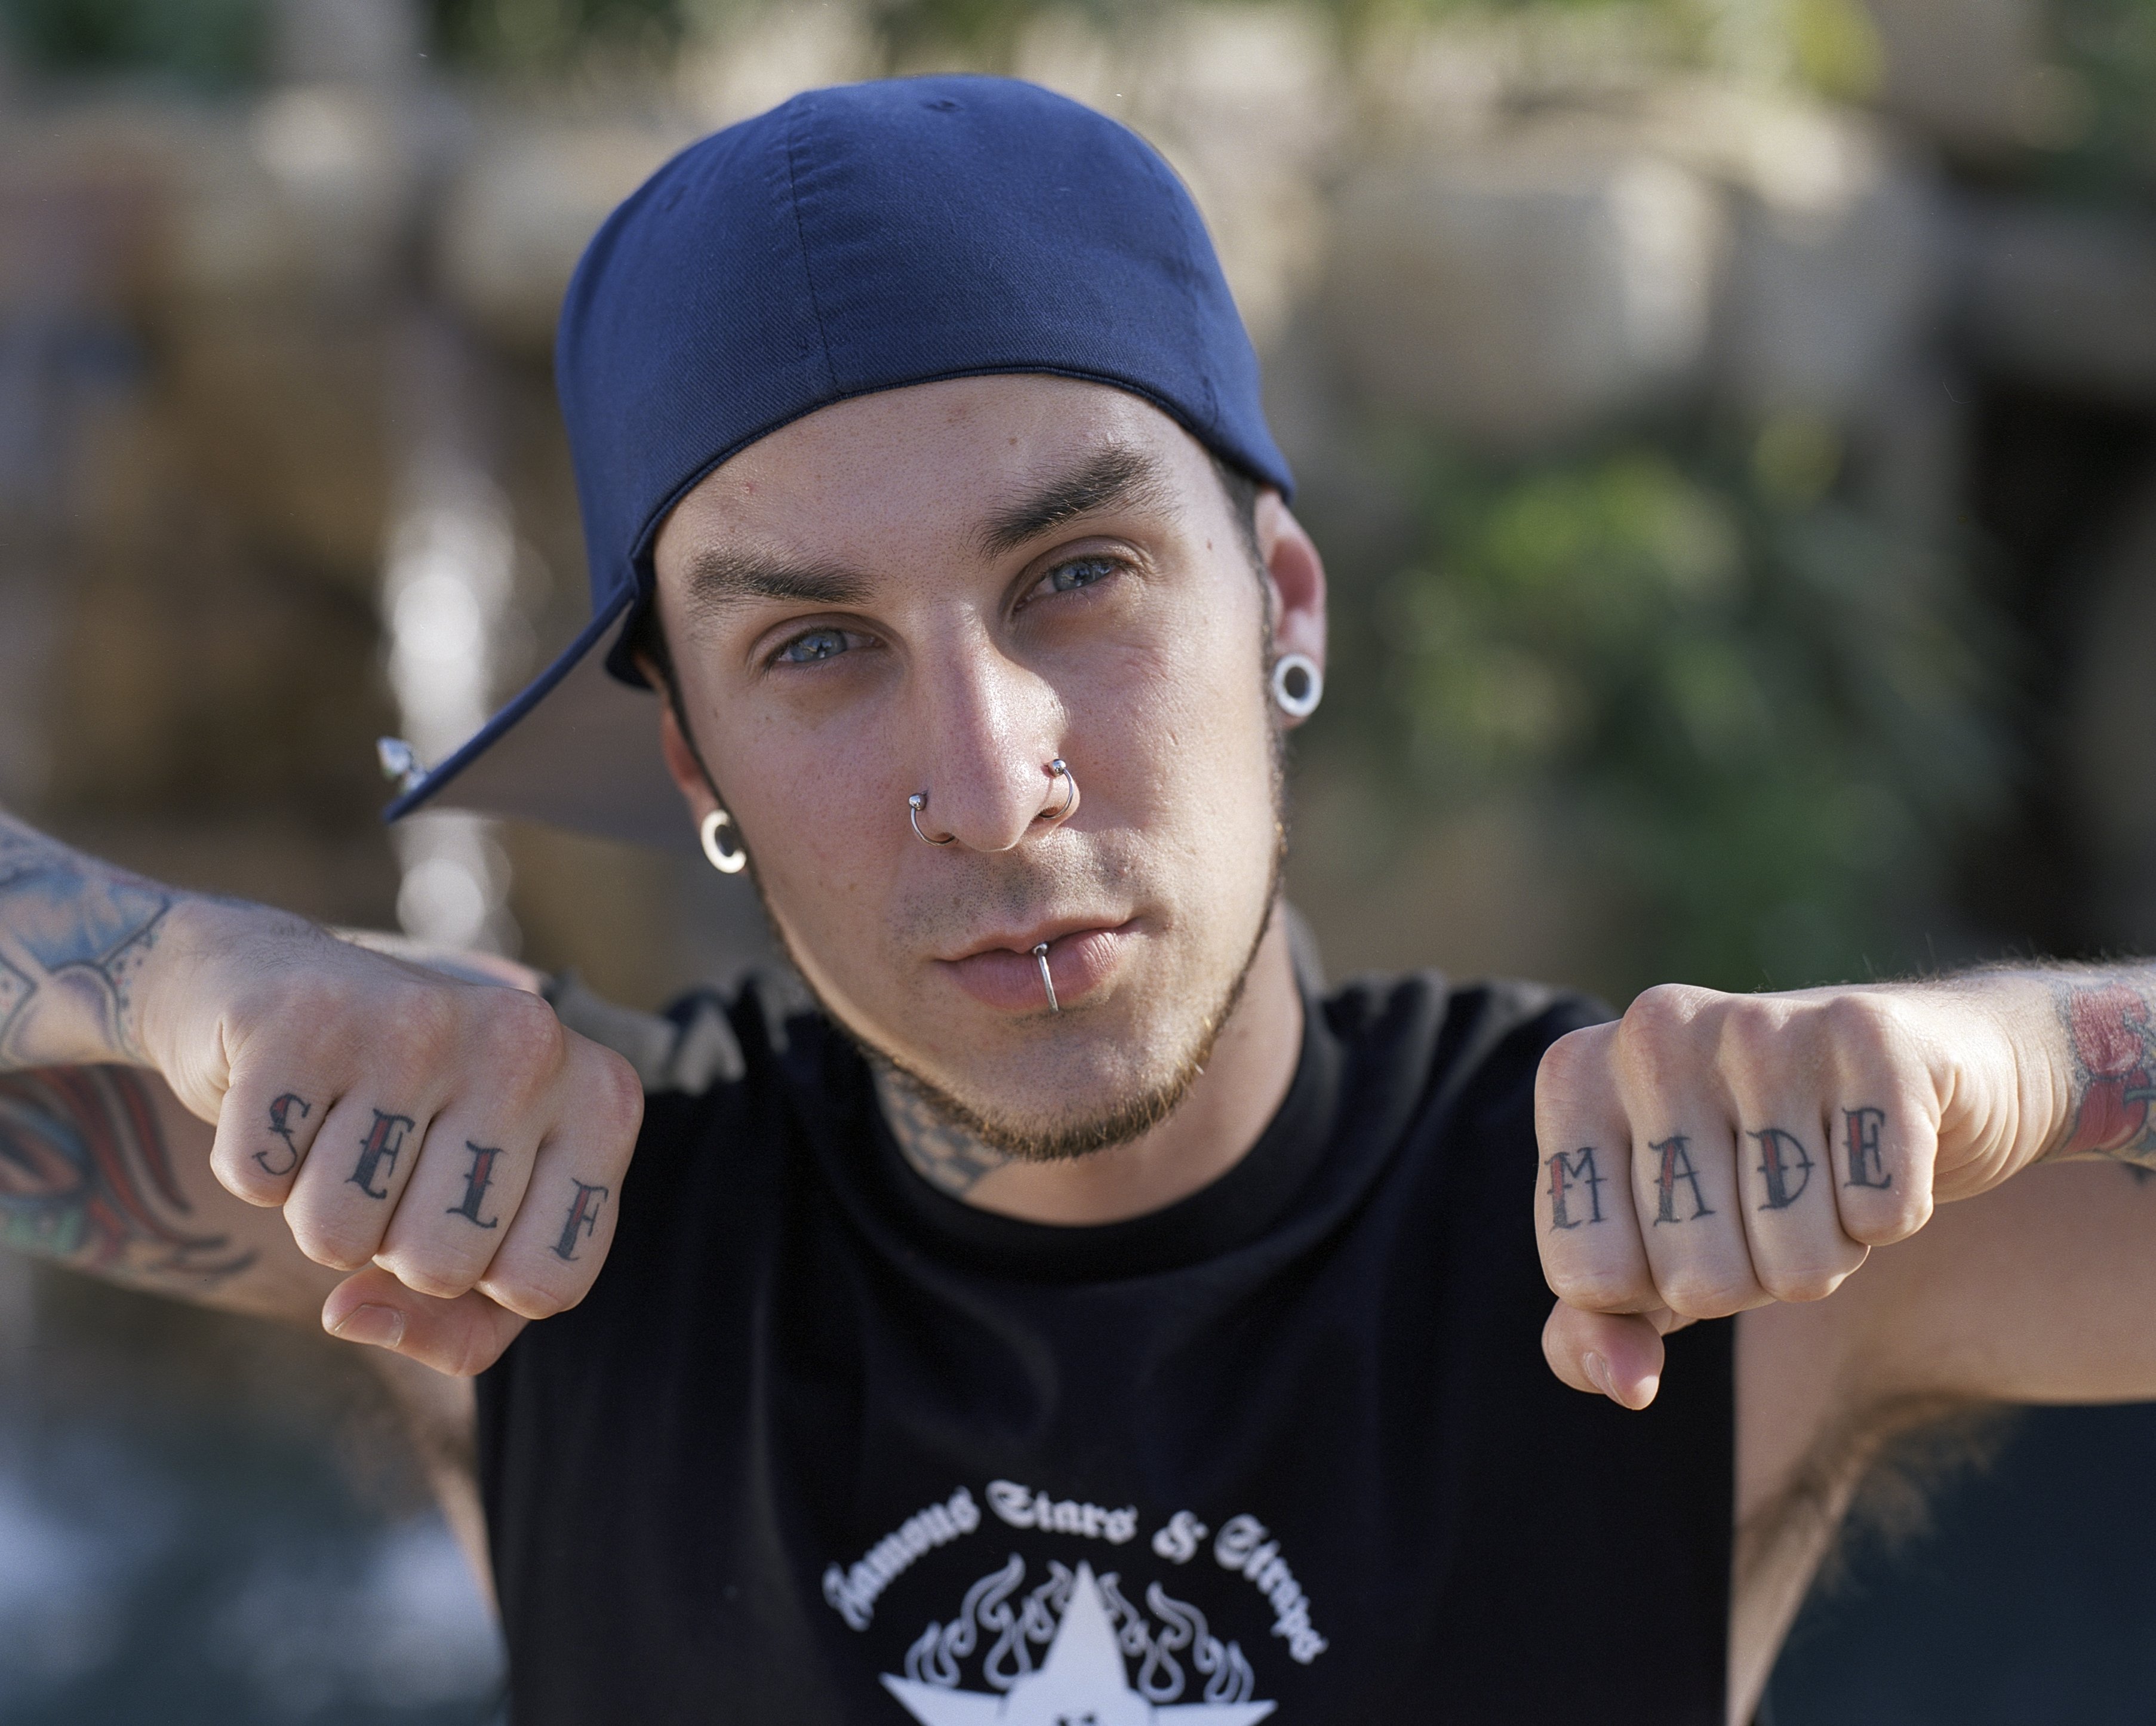 Travis Barker of Blink-182 at his home in July, 2001 in Riverside, California. | Source: Getty Images